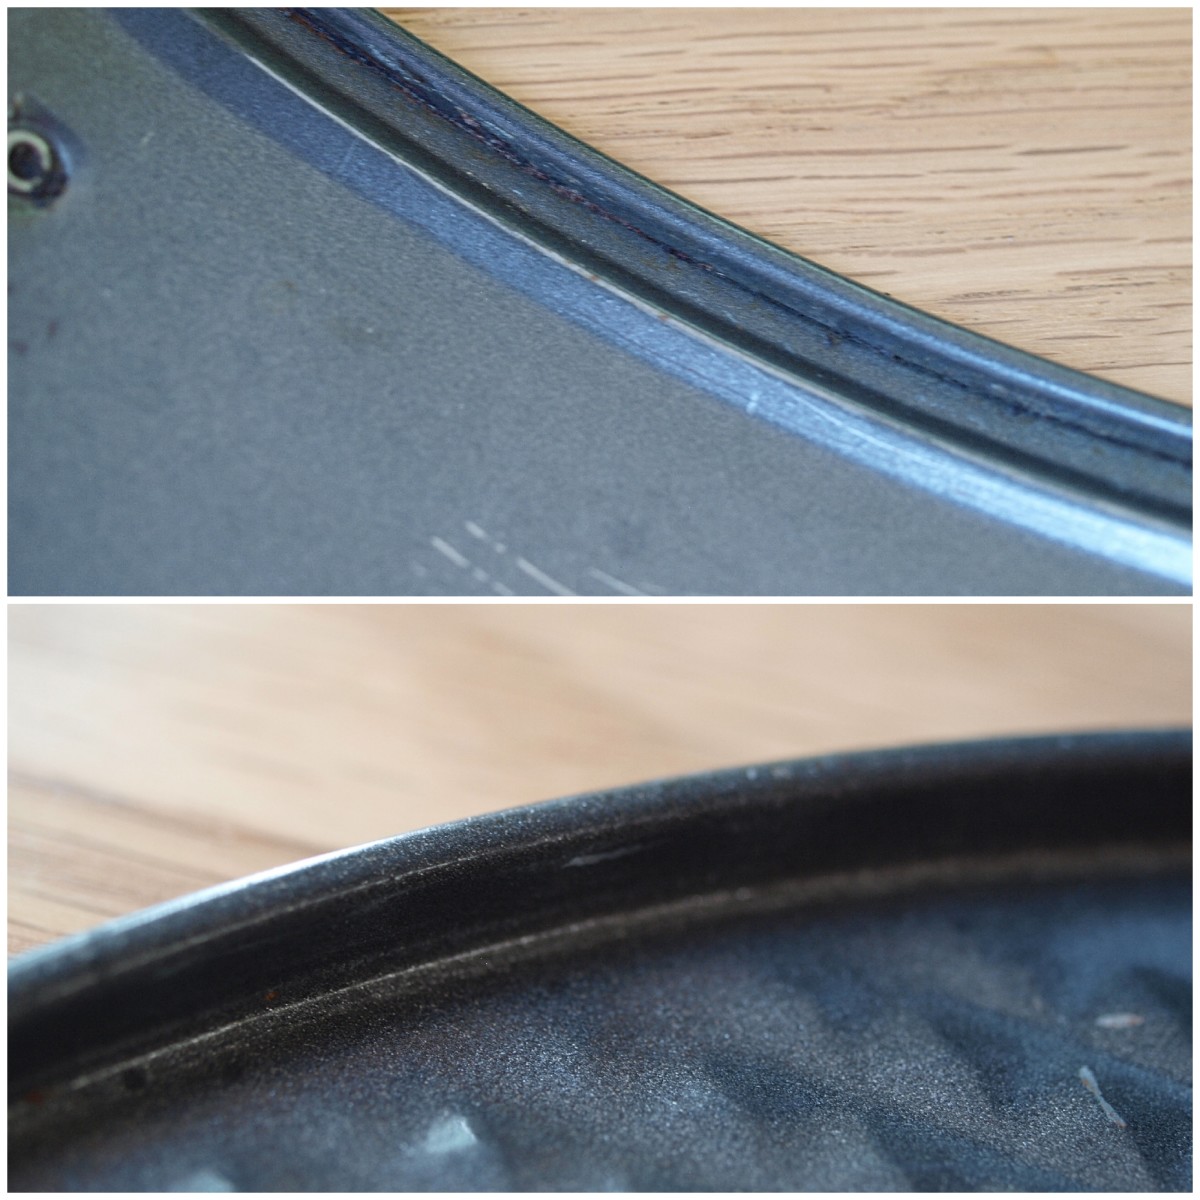 This is the inside rim of the side and the lip of the bottom of the pan.